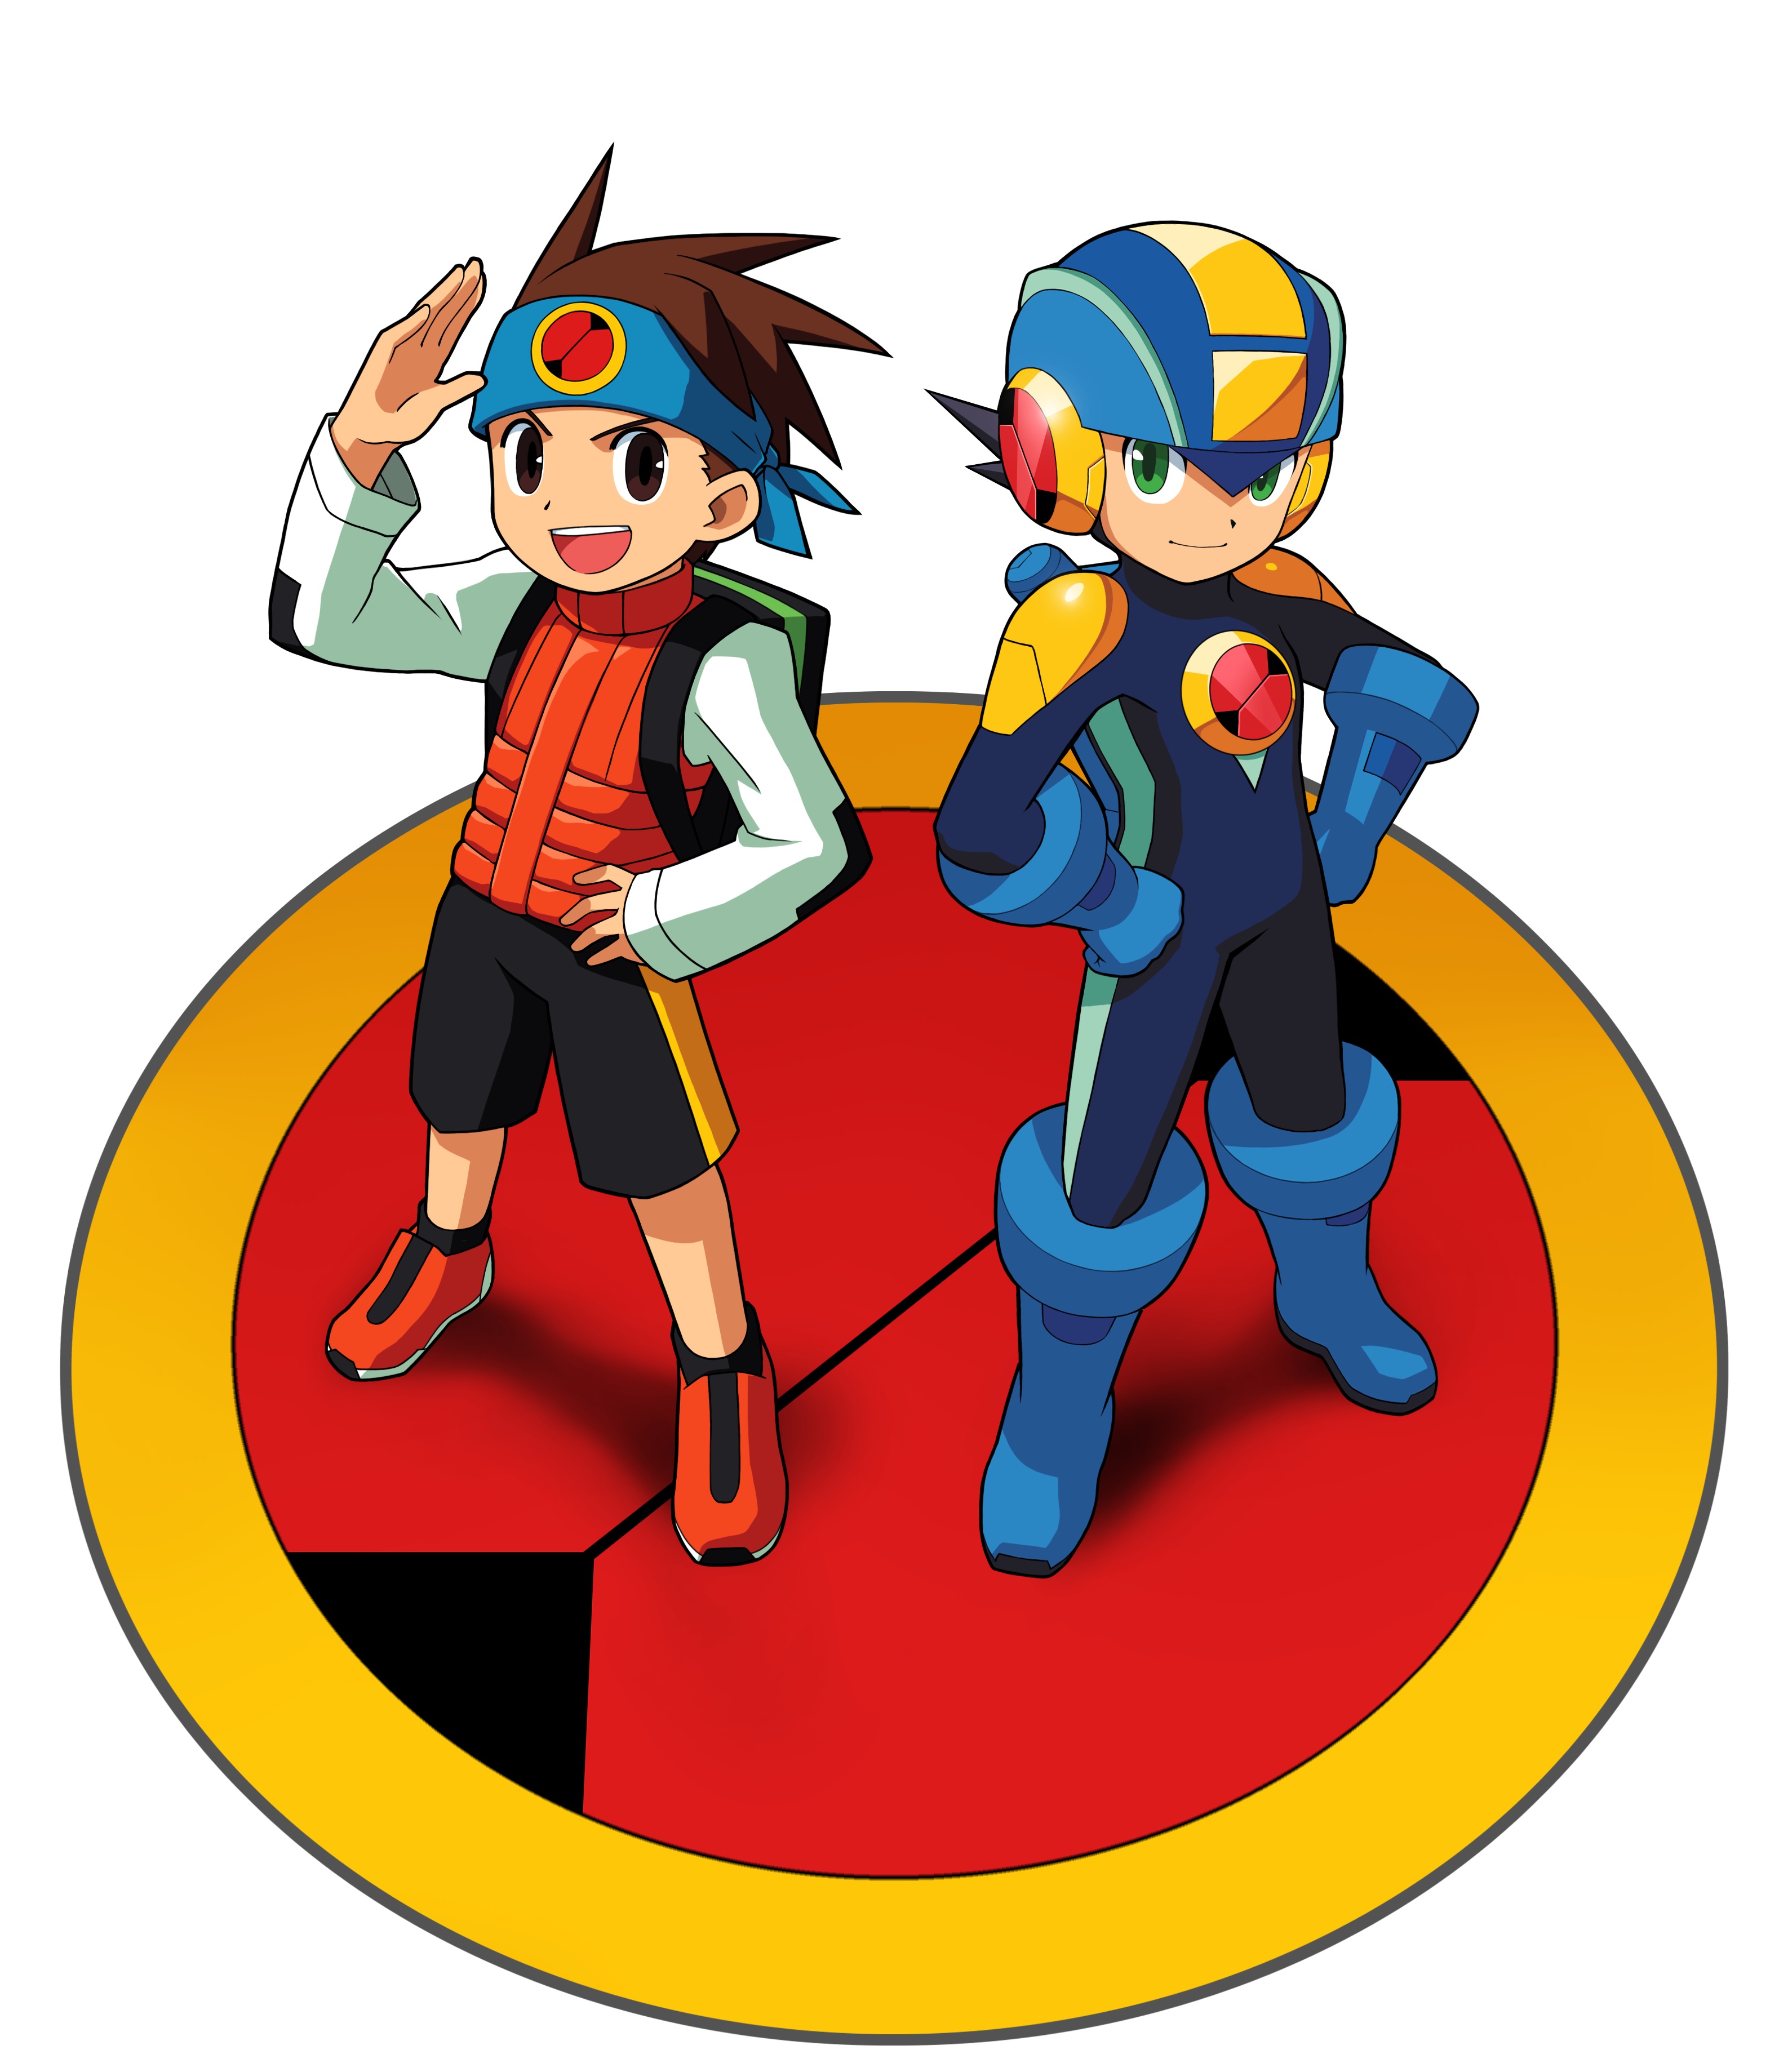 Mega Man NT Warrior Anime Appearing Online for Free - Siliconera